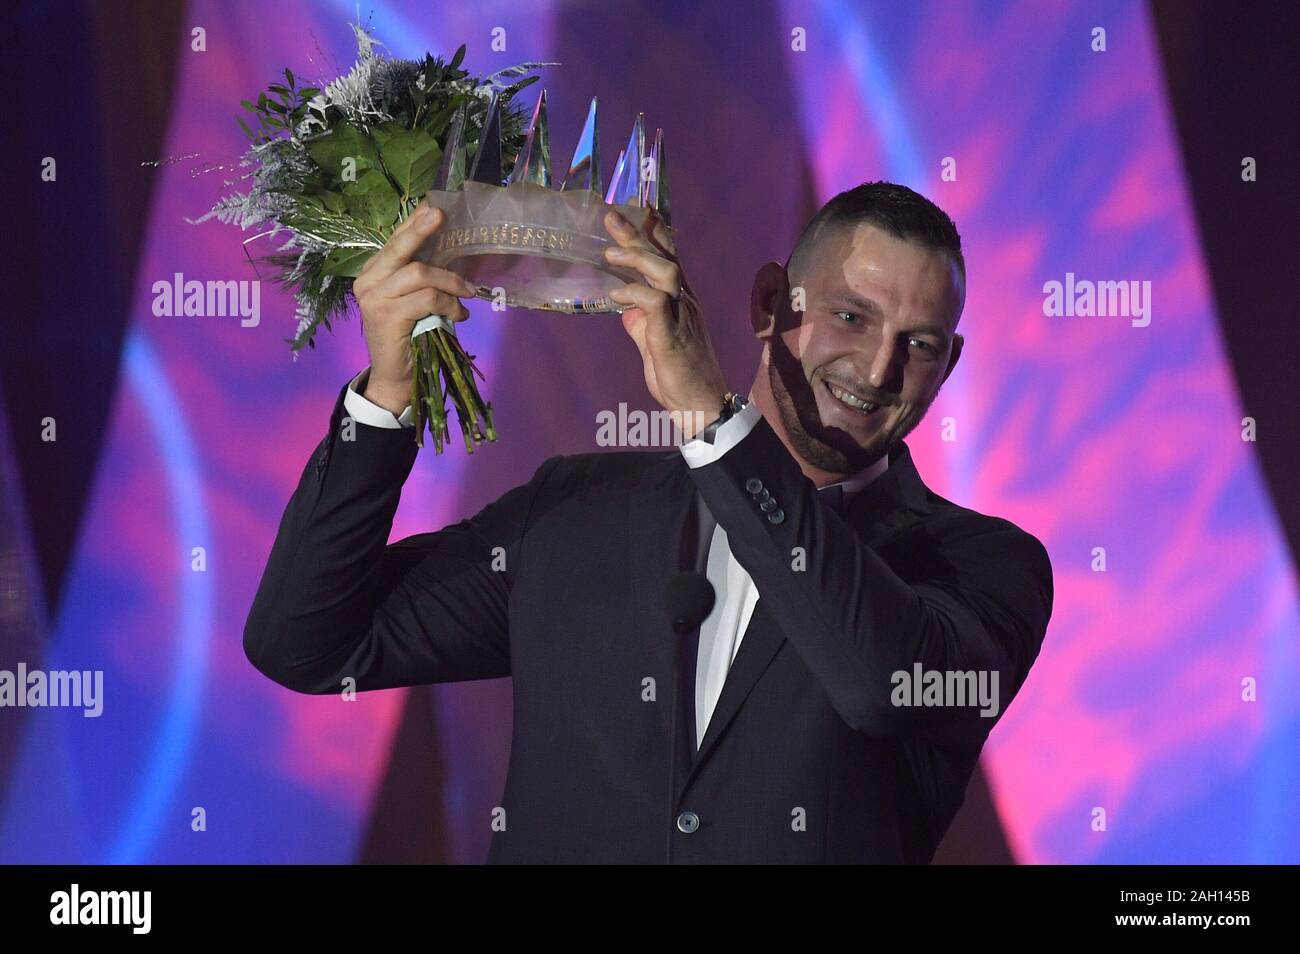 Prague, Czech Republic. 20th Dec, 2019. Heavyweight judoka Lukas Krpalek,  29, the current world champion, became the Czech Champion of Sports 2019,  winning the annual poll of sport journalists for the second